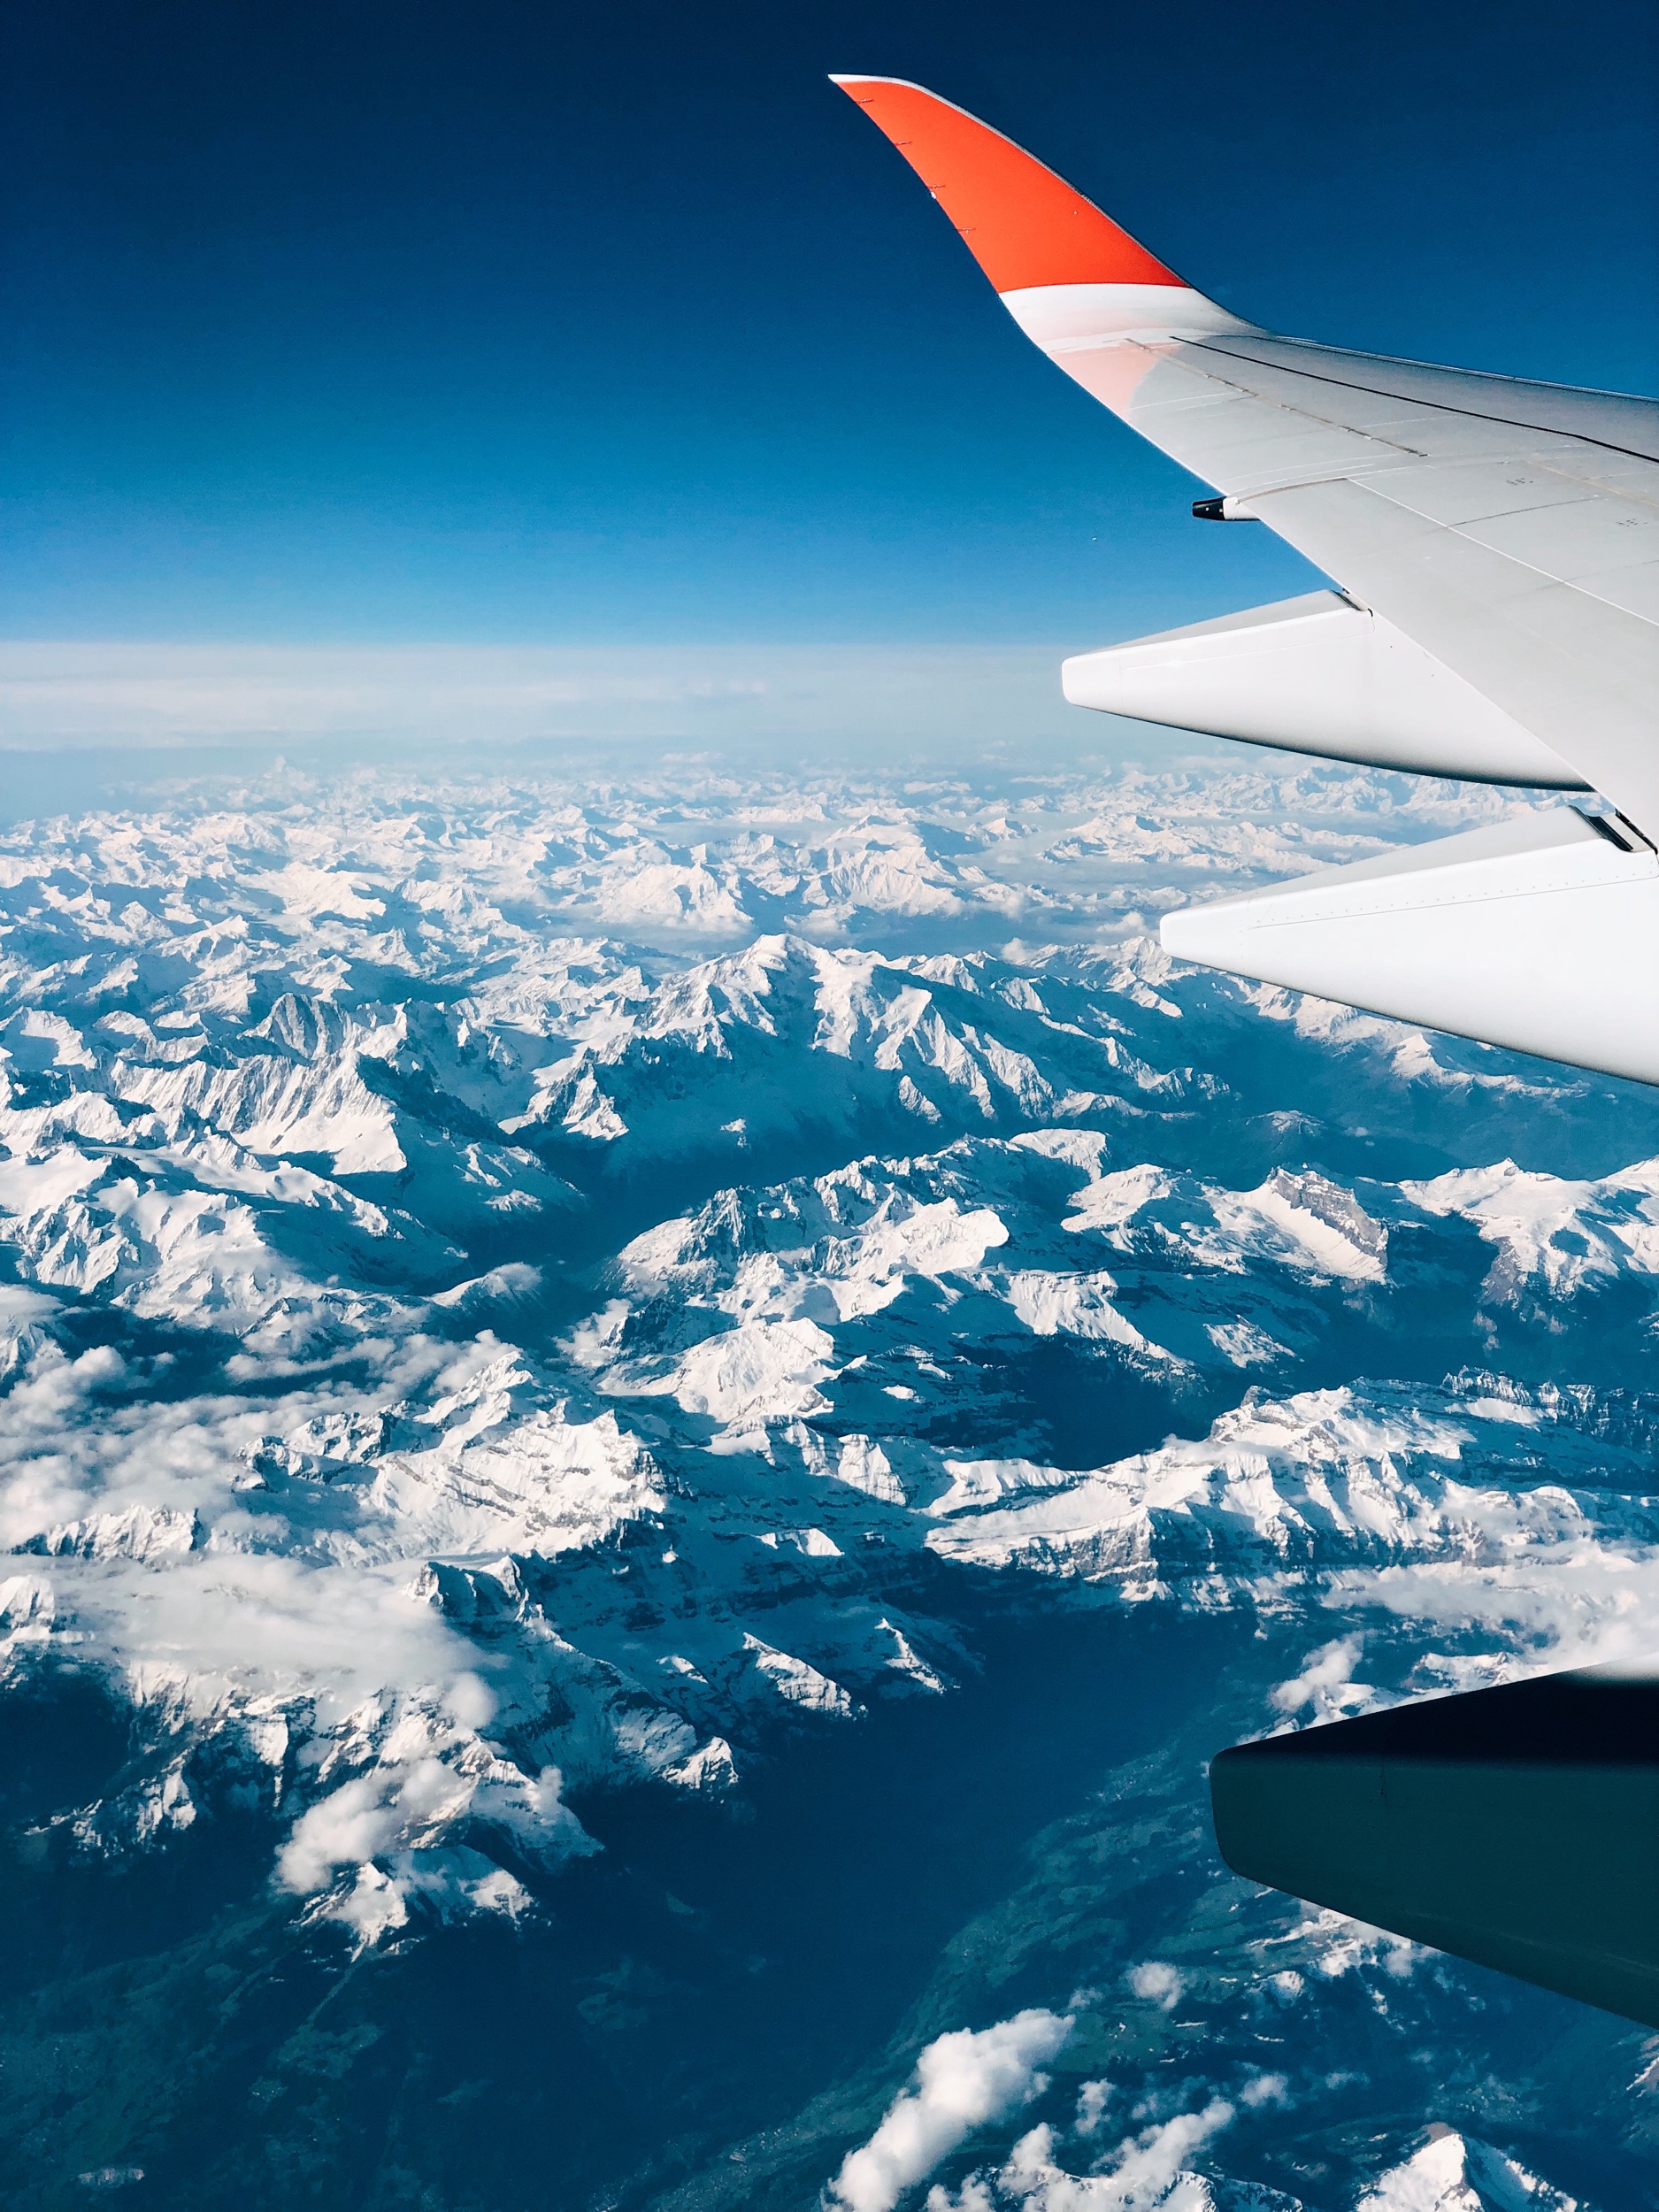 Mont Blanc Alps from Air Mauritius plane